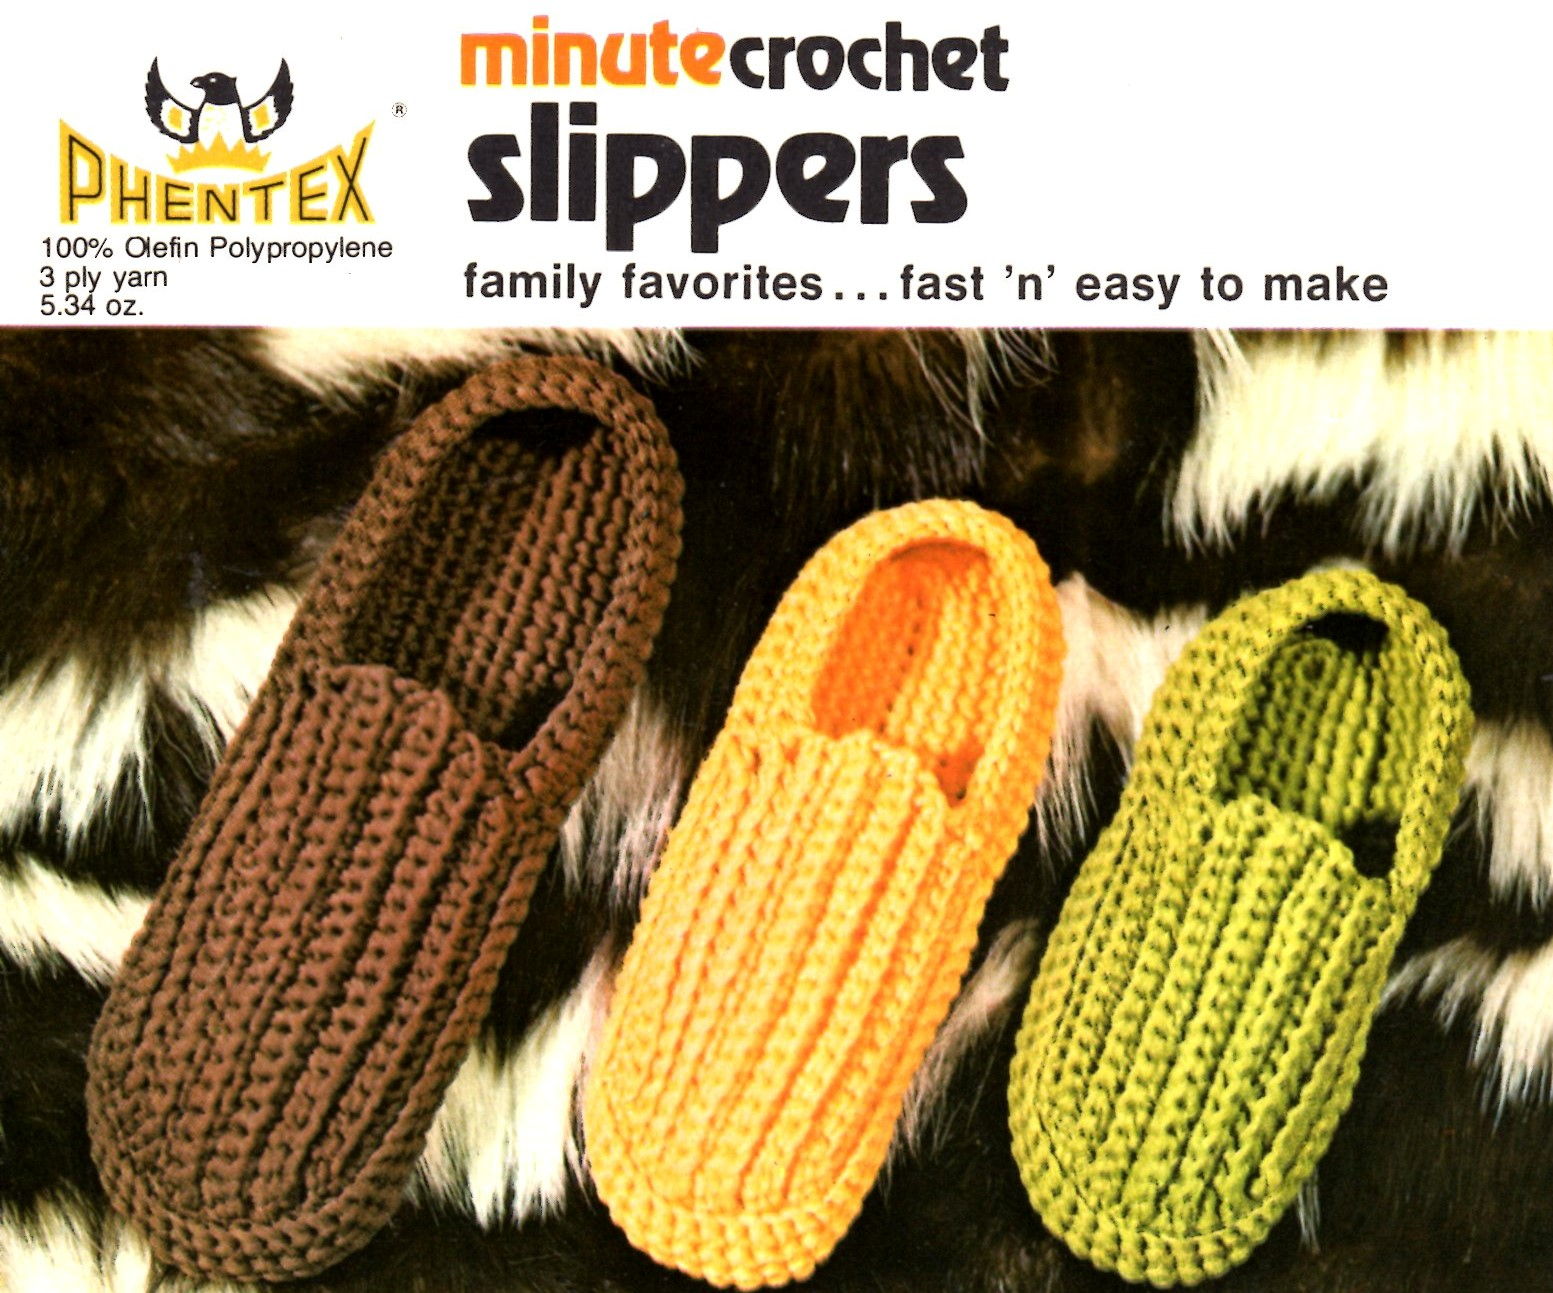 Crochet Slipper Patterns Minute Crochet Slippers For The Whole Family Fast And Easy To Make